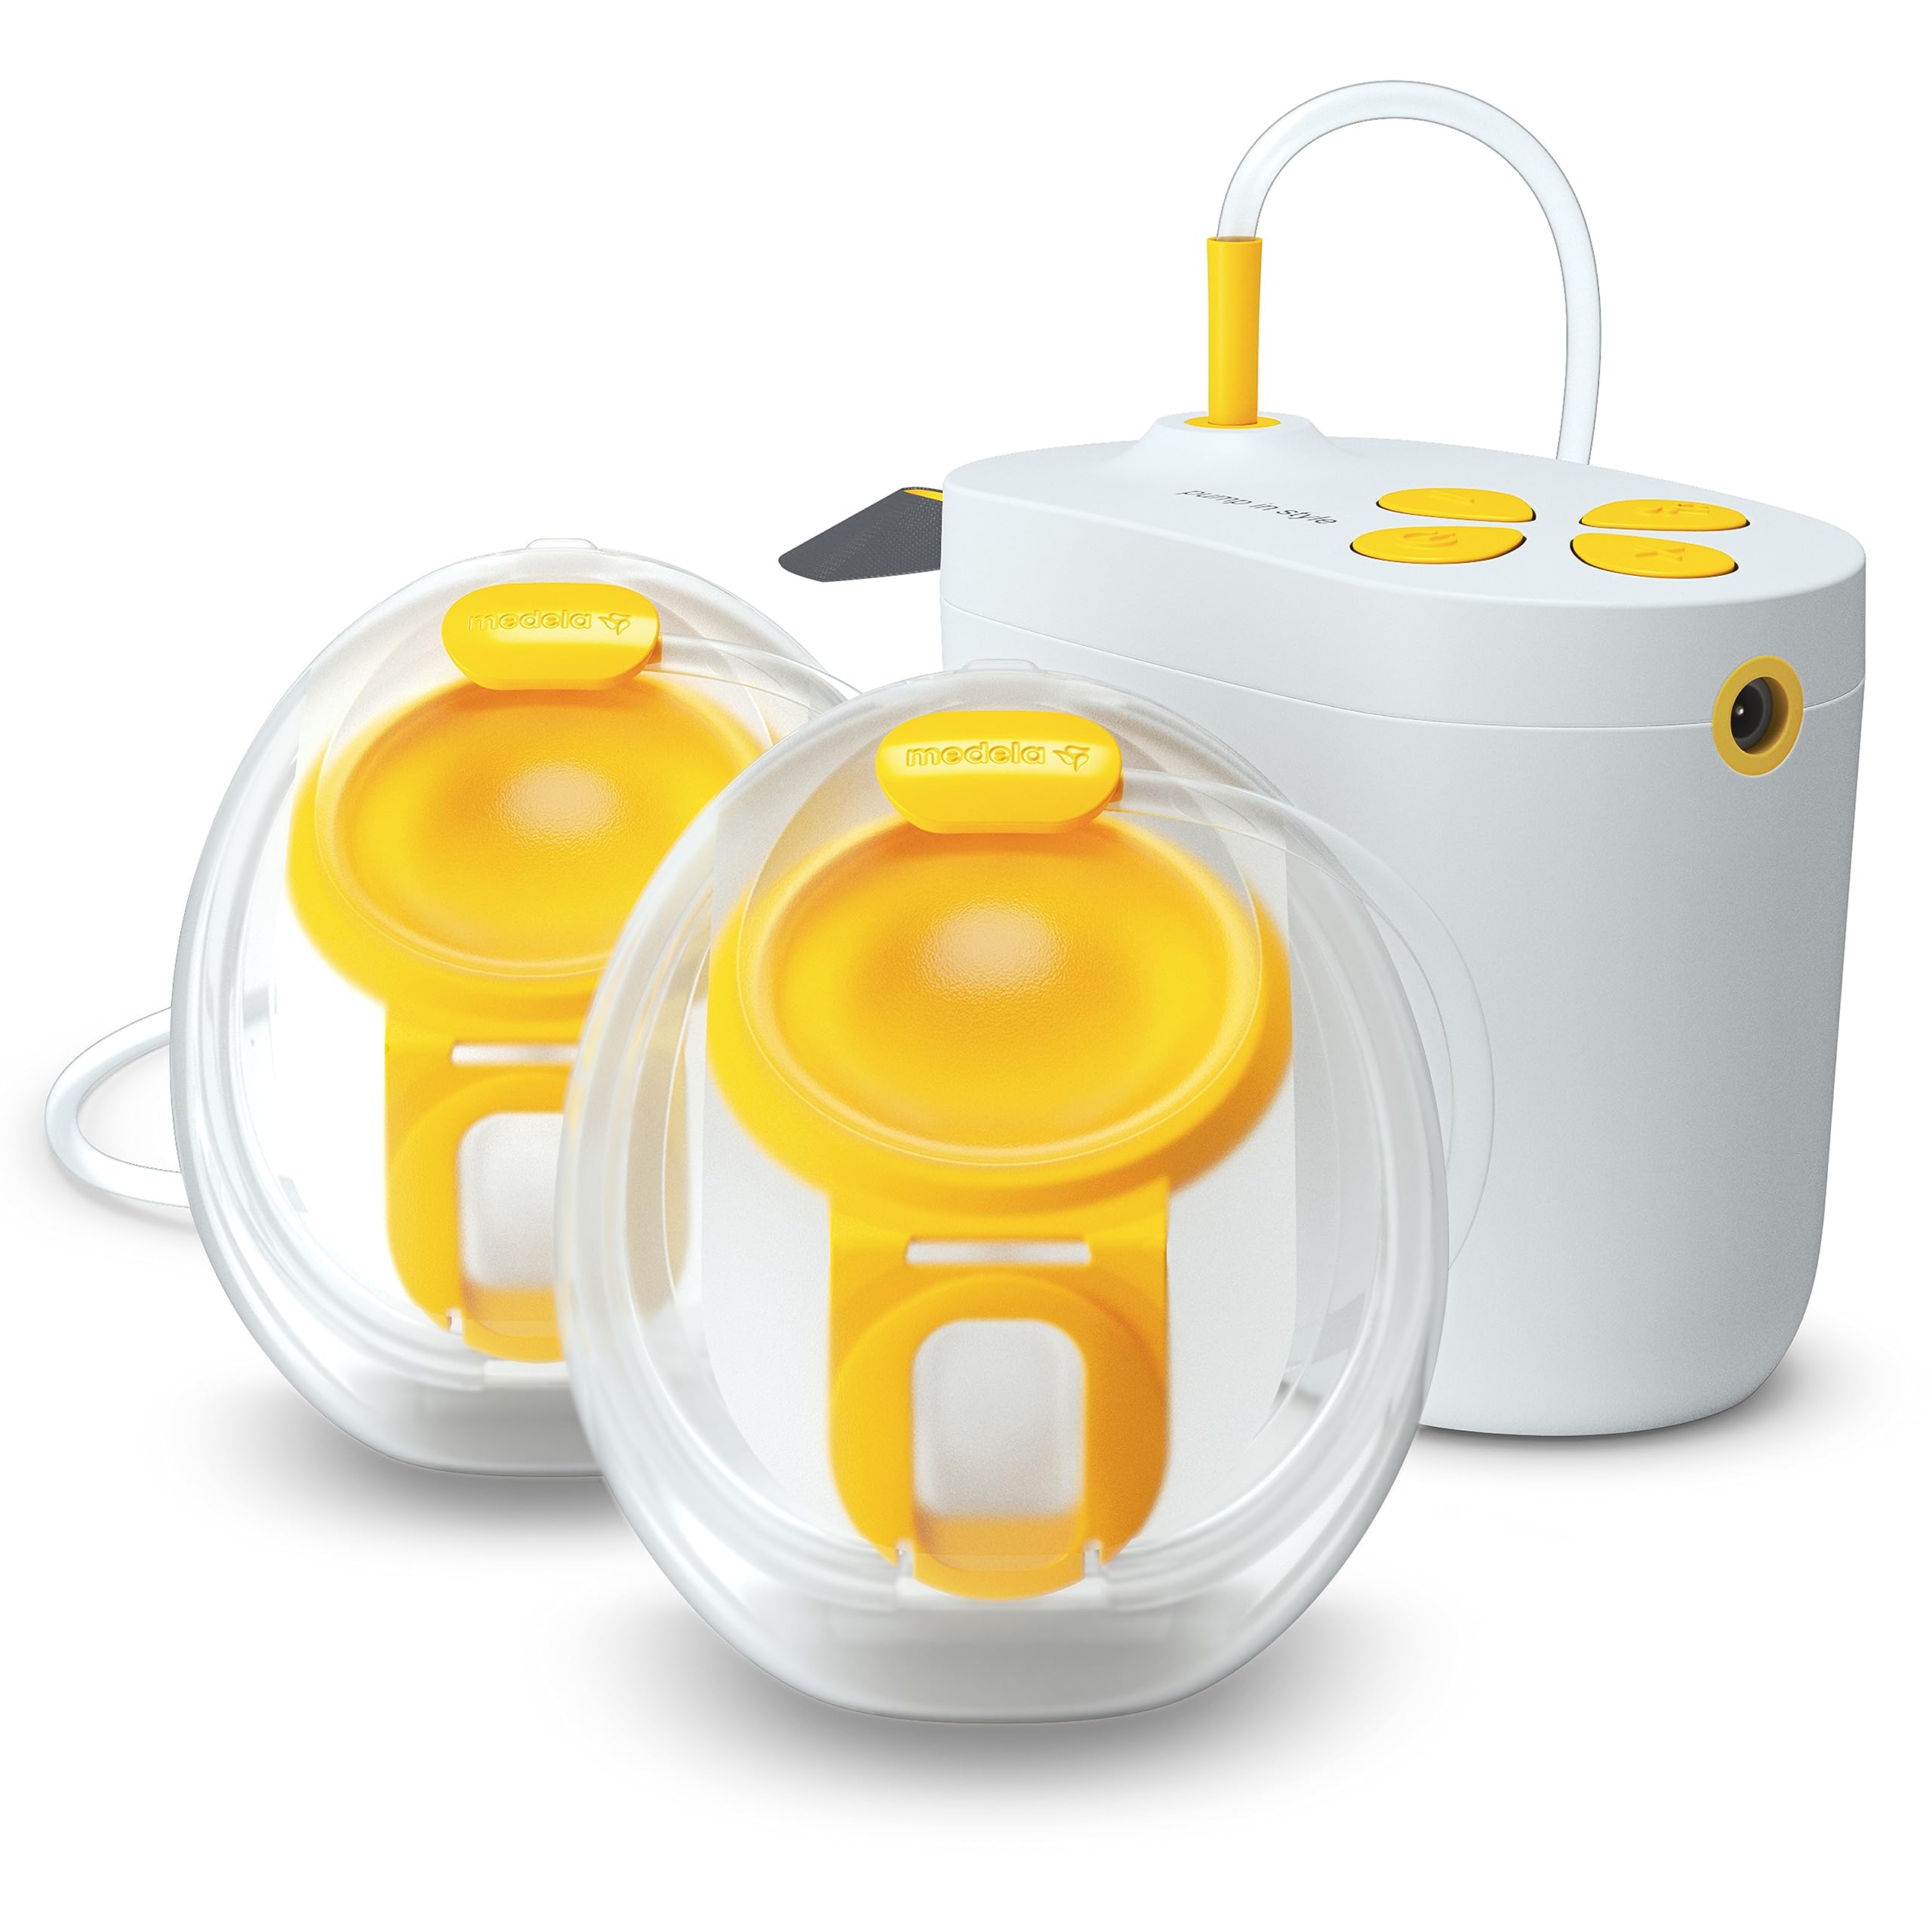 Medela Pump in Style Hands-Free Breast Pump, Wearable Cups, Portable and Discreet Double Electric Breast Pump